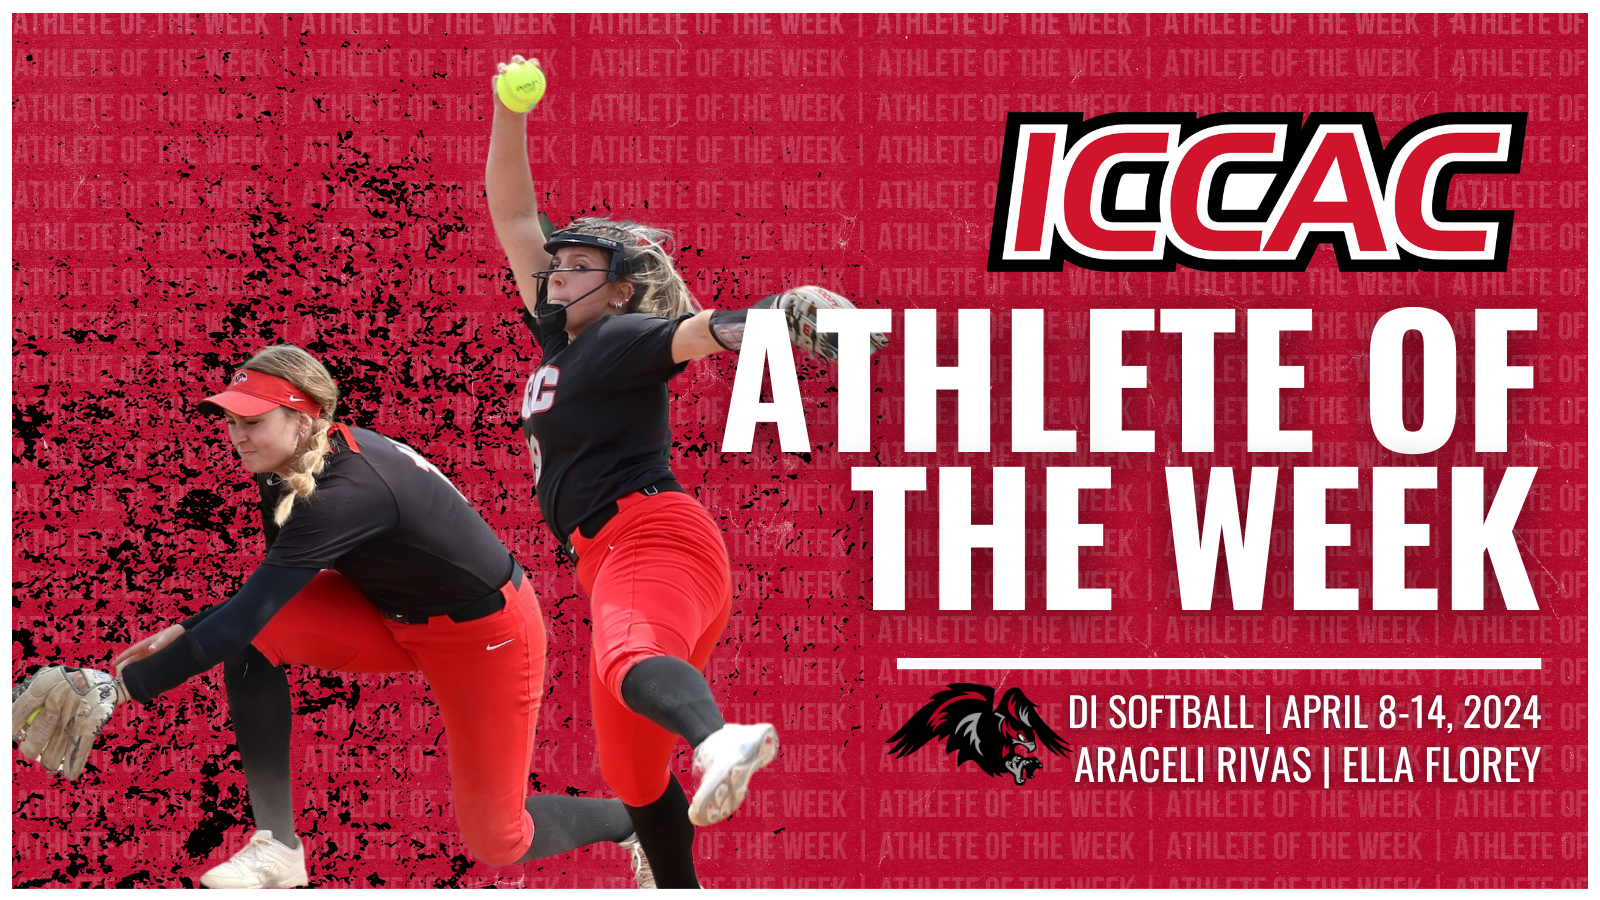 SOUTHEASTERN'S RIVAS & FLOREY EARN ICCAC ATHLETE OF THE WEEK